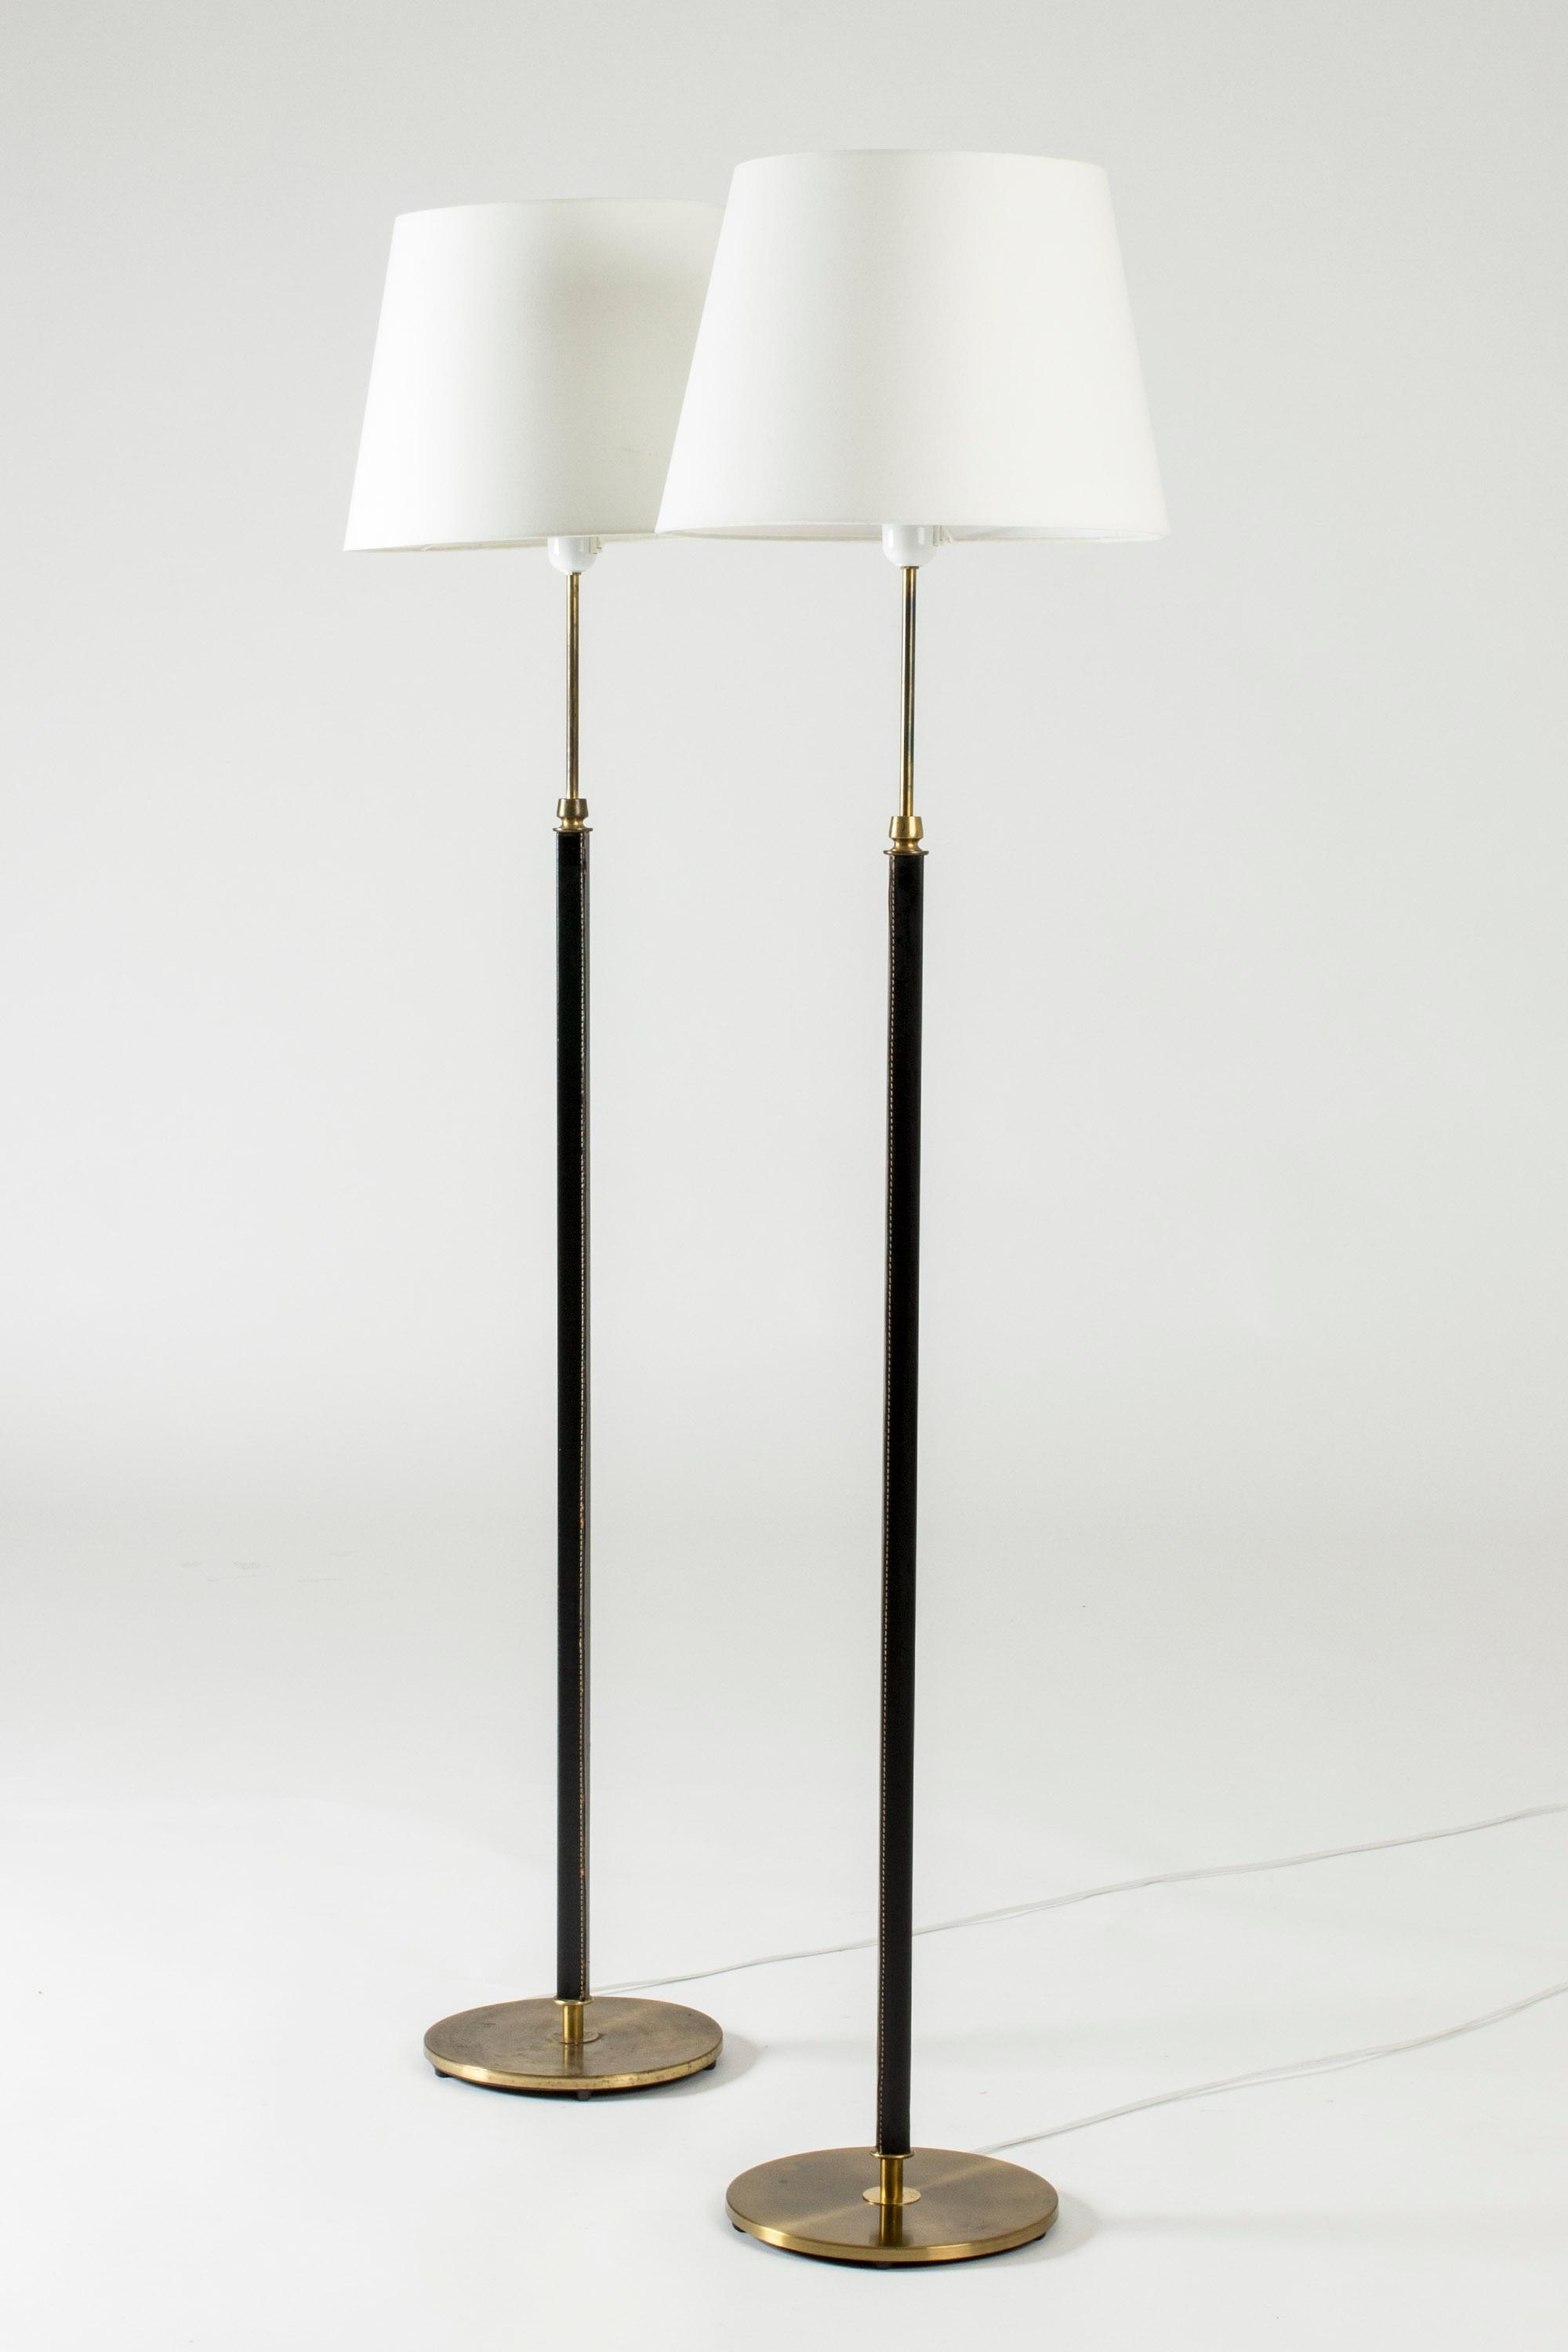 Pair of cool floor lamps from Falkenbergs Belysning, made from brass. Sleek square stems dressed with black leather.